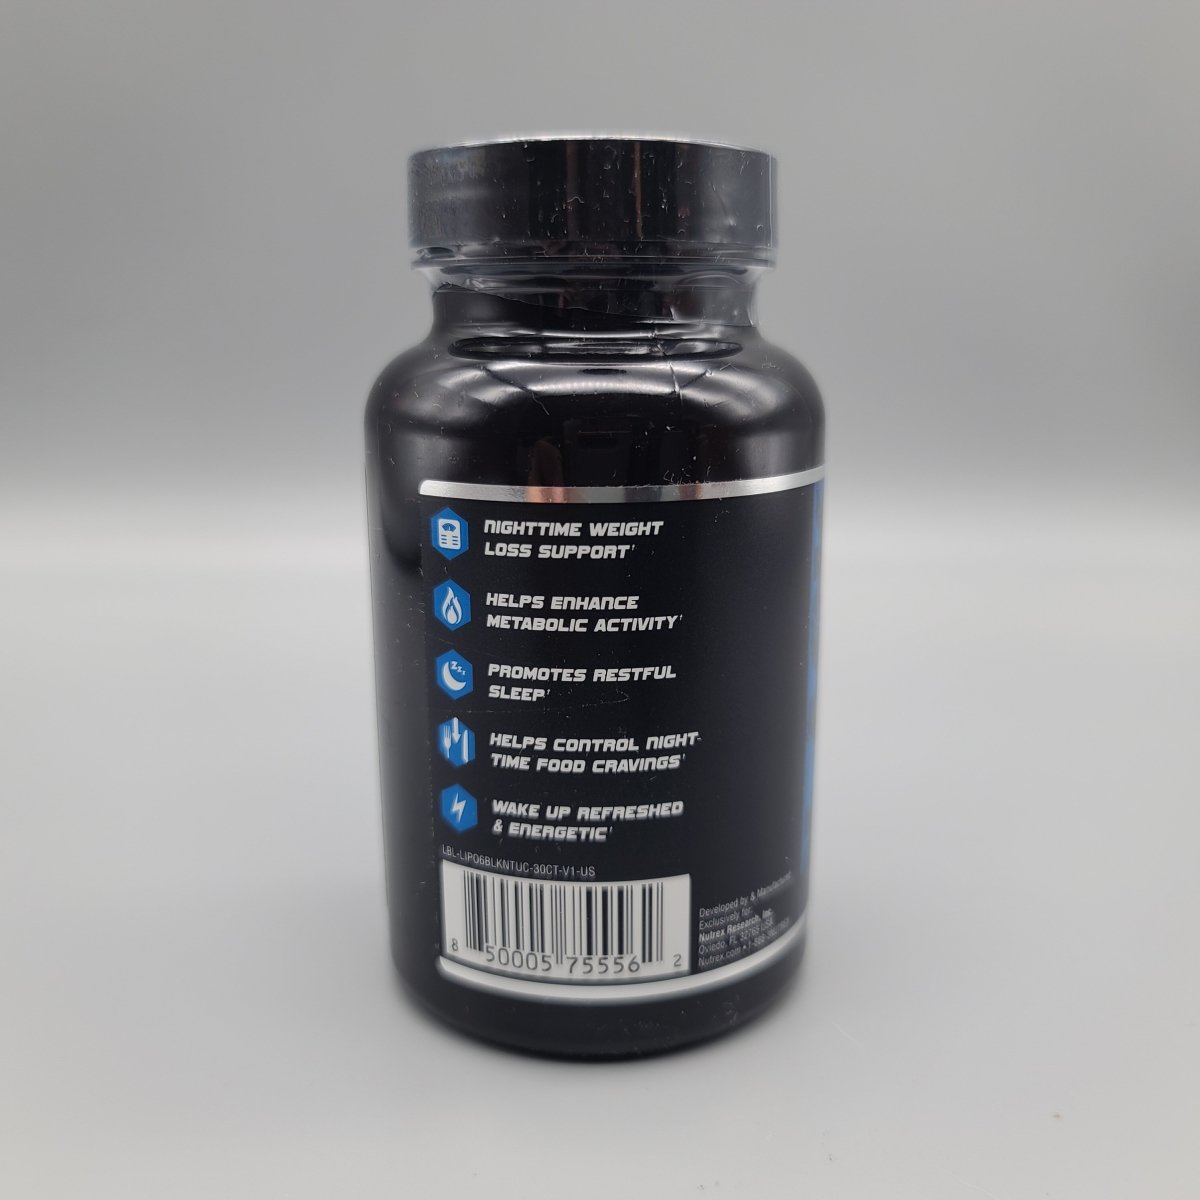 Lipo 6 - Black Nighttime - Ultra Concentrate - Weight Loss & Sleep Support - 60 Capsules